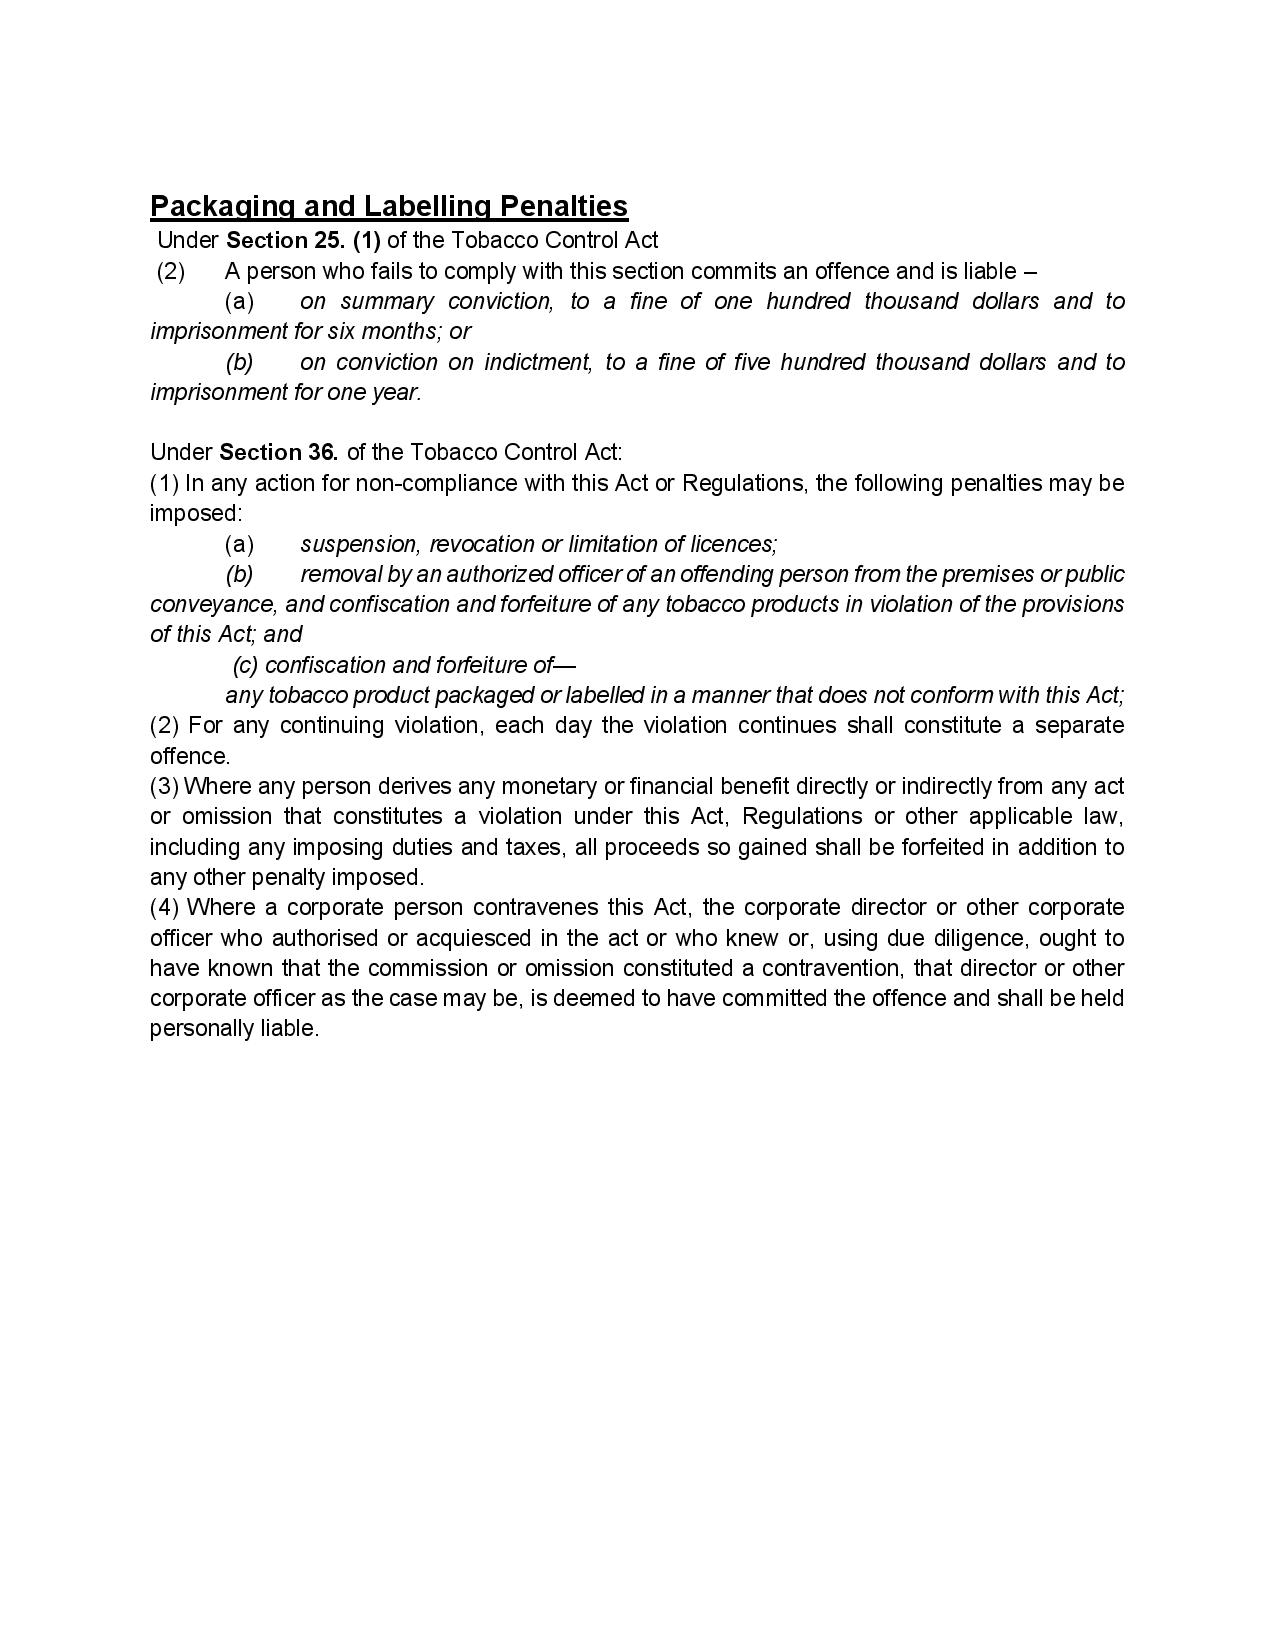 Packaging and Labeling Requirements for Tobacco Products under the Tobacco Control Act page 4